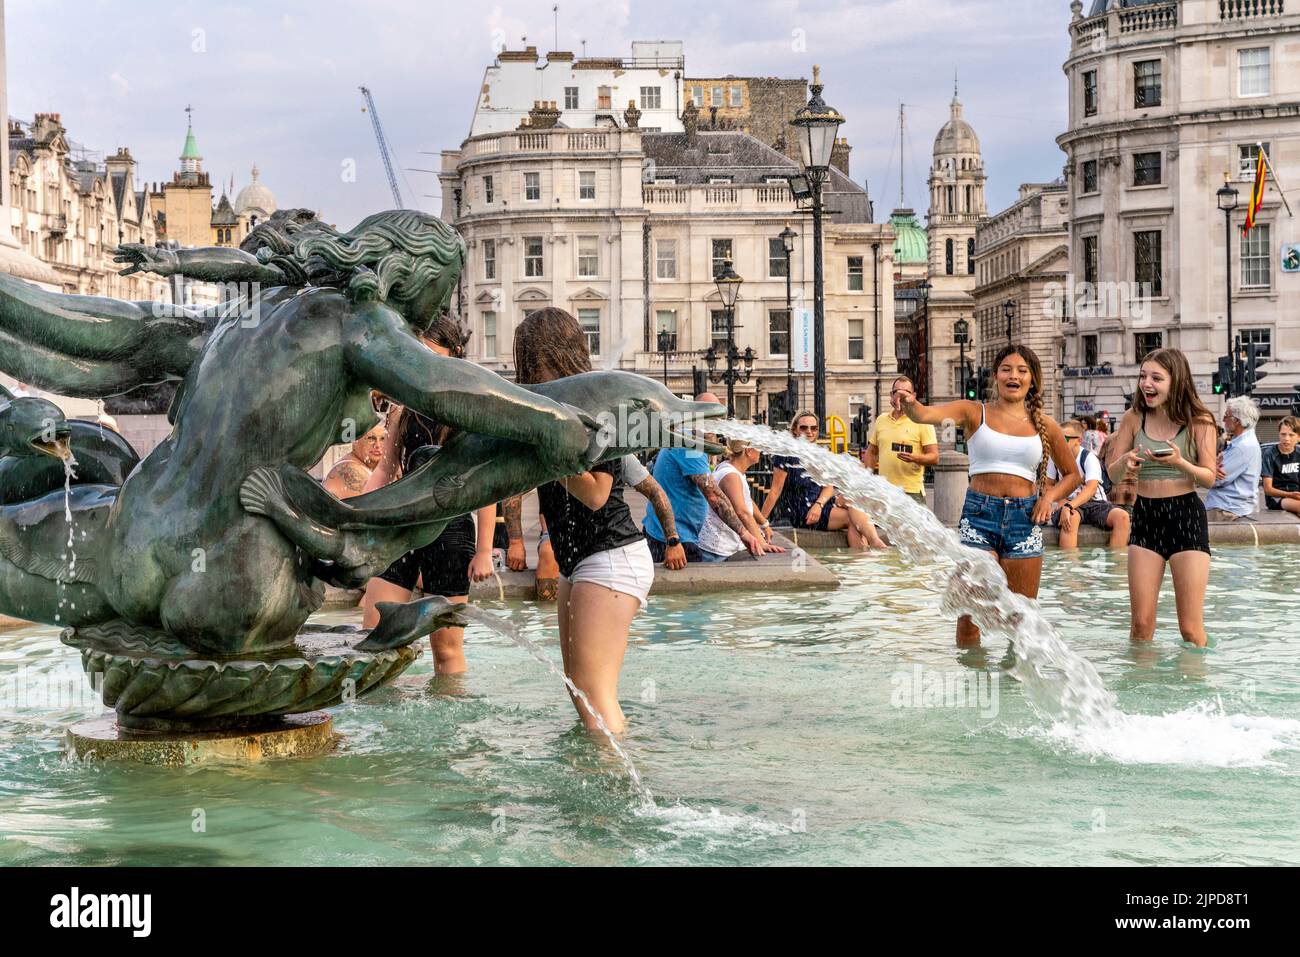 Young People Cool Off In The Fountains In Trafalgar Square During The Hottest Day Ever Recorded In The Capital, London, UK. Stock Photo